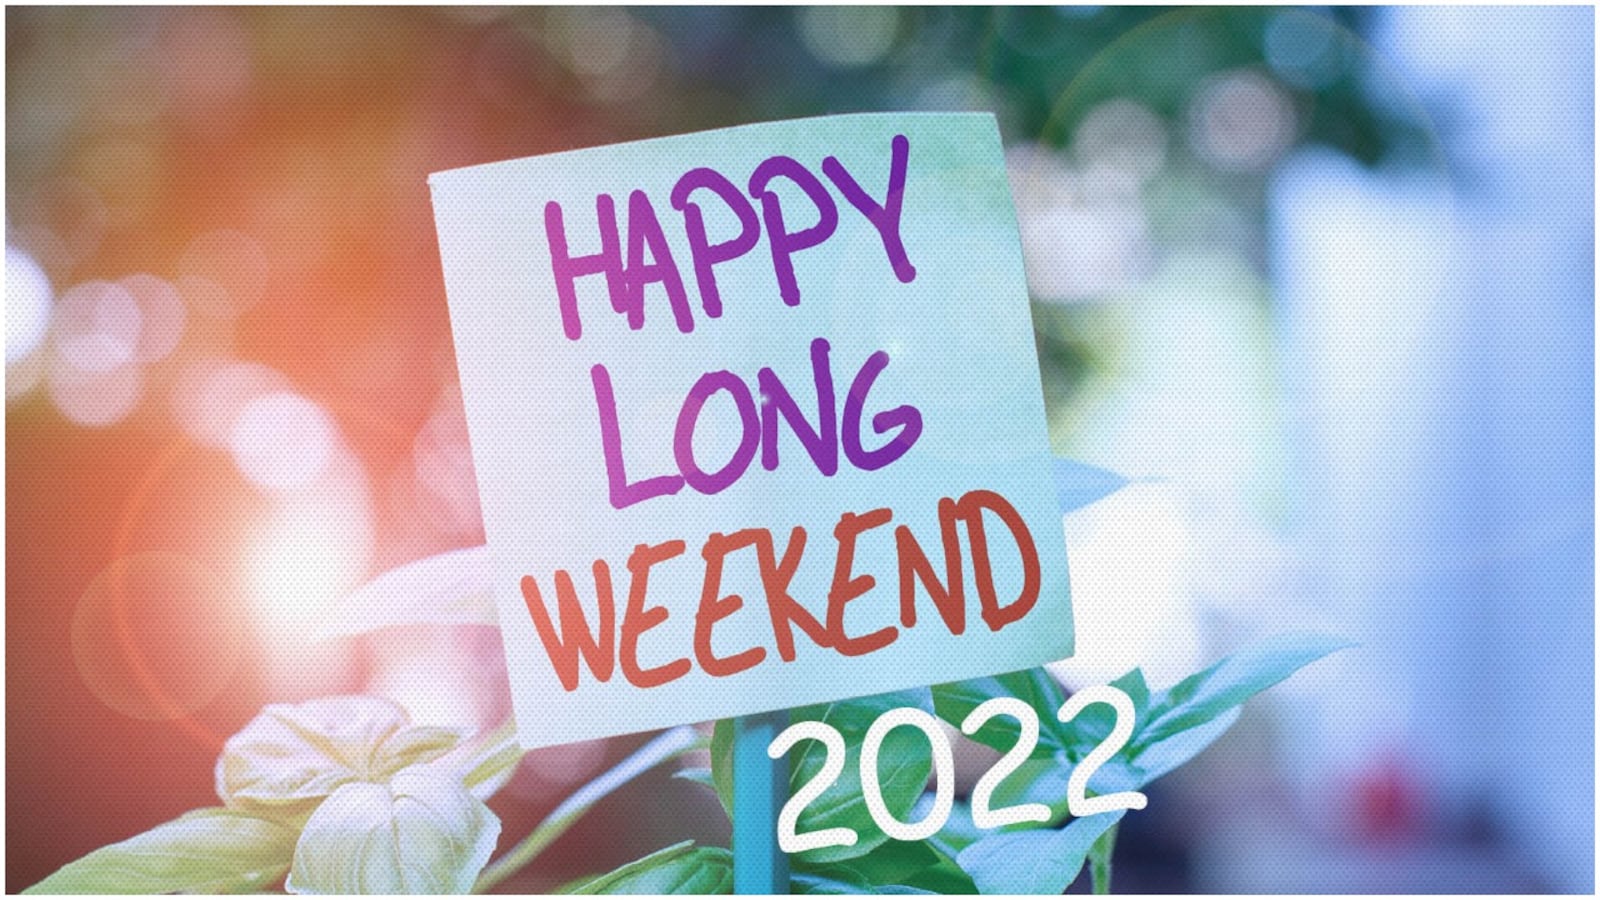 Long weekends 2022: Full list to plan your leaves, travels, holidays